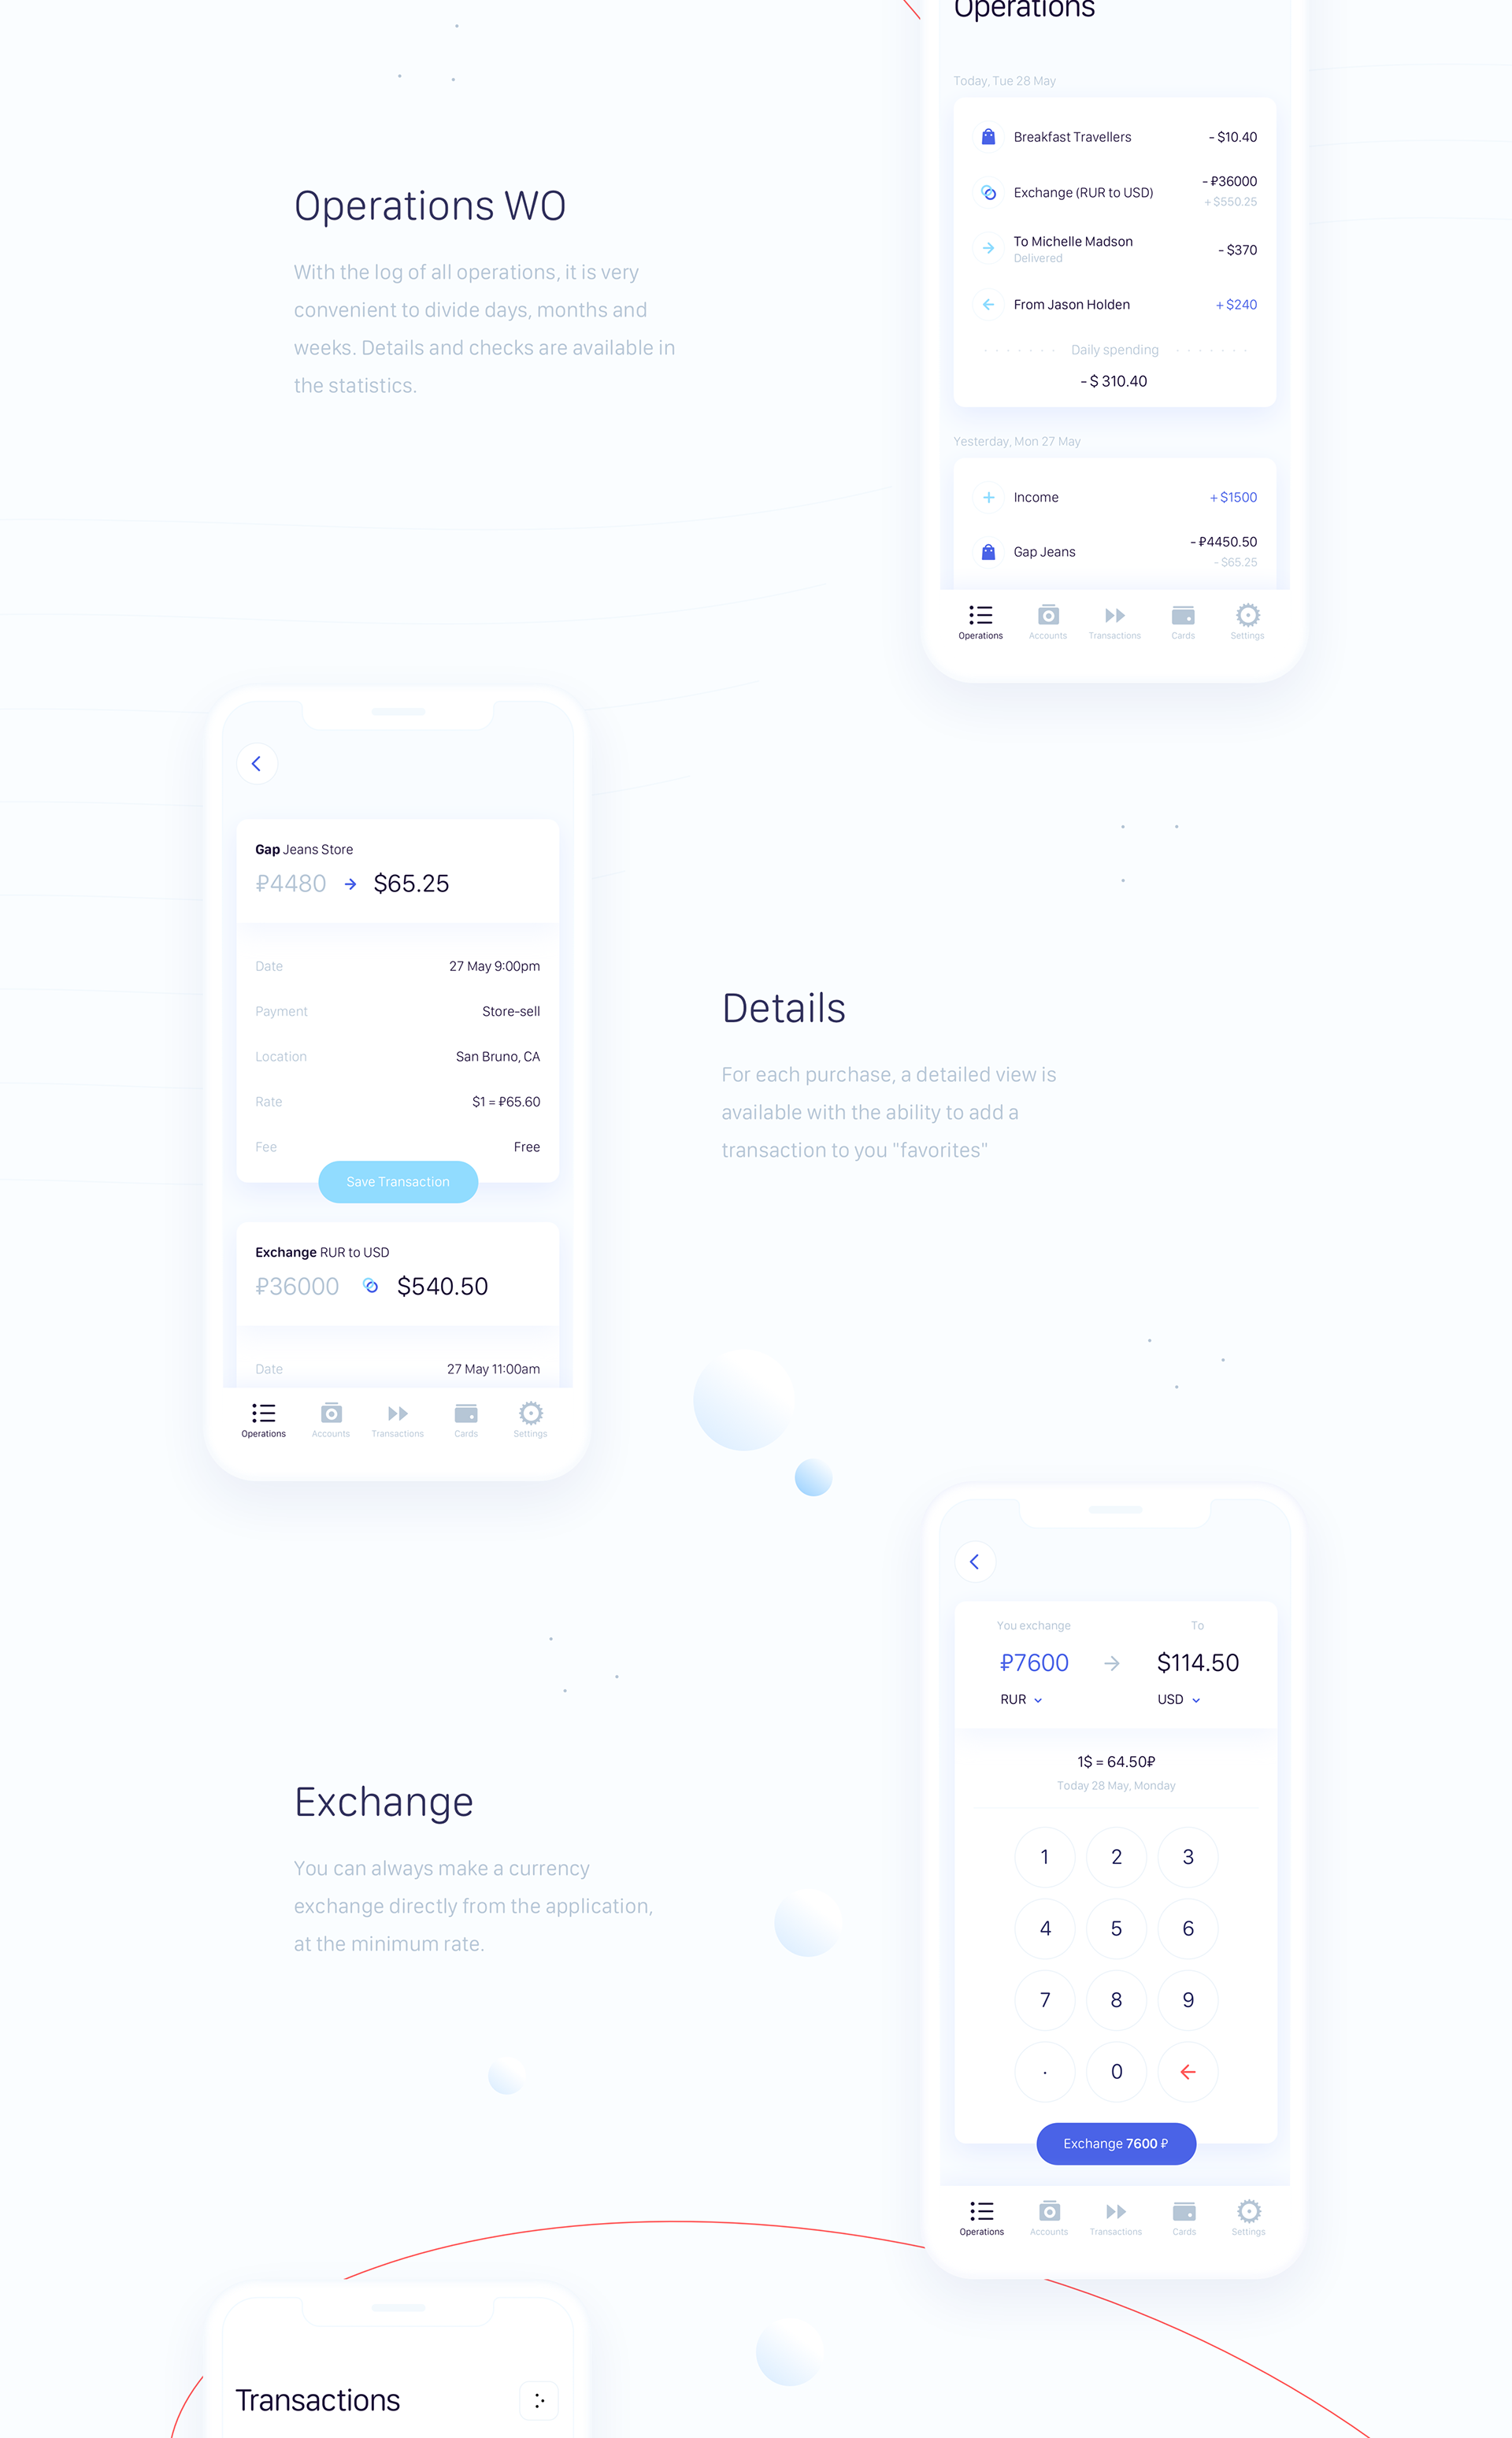 Interaction Design of Payday, a personal finance app